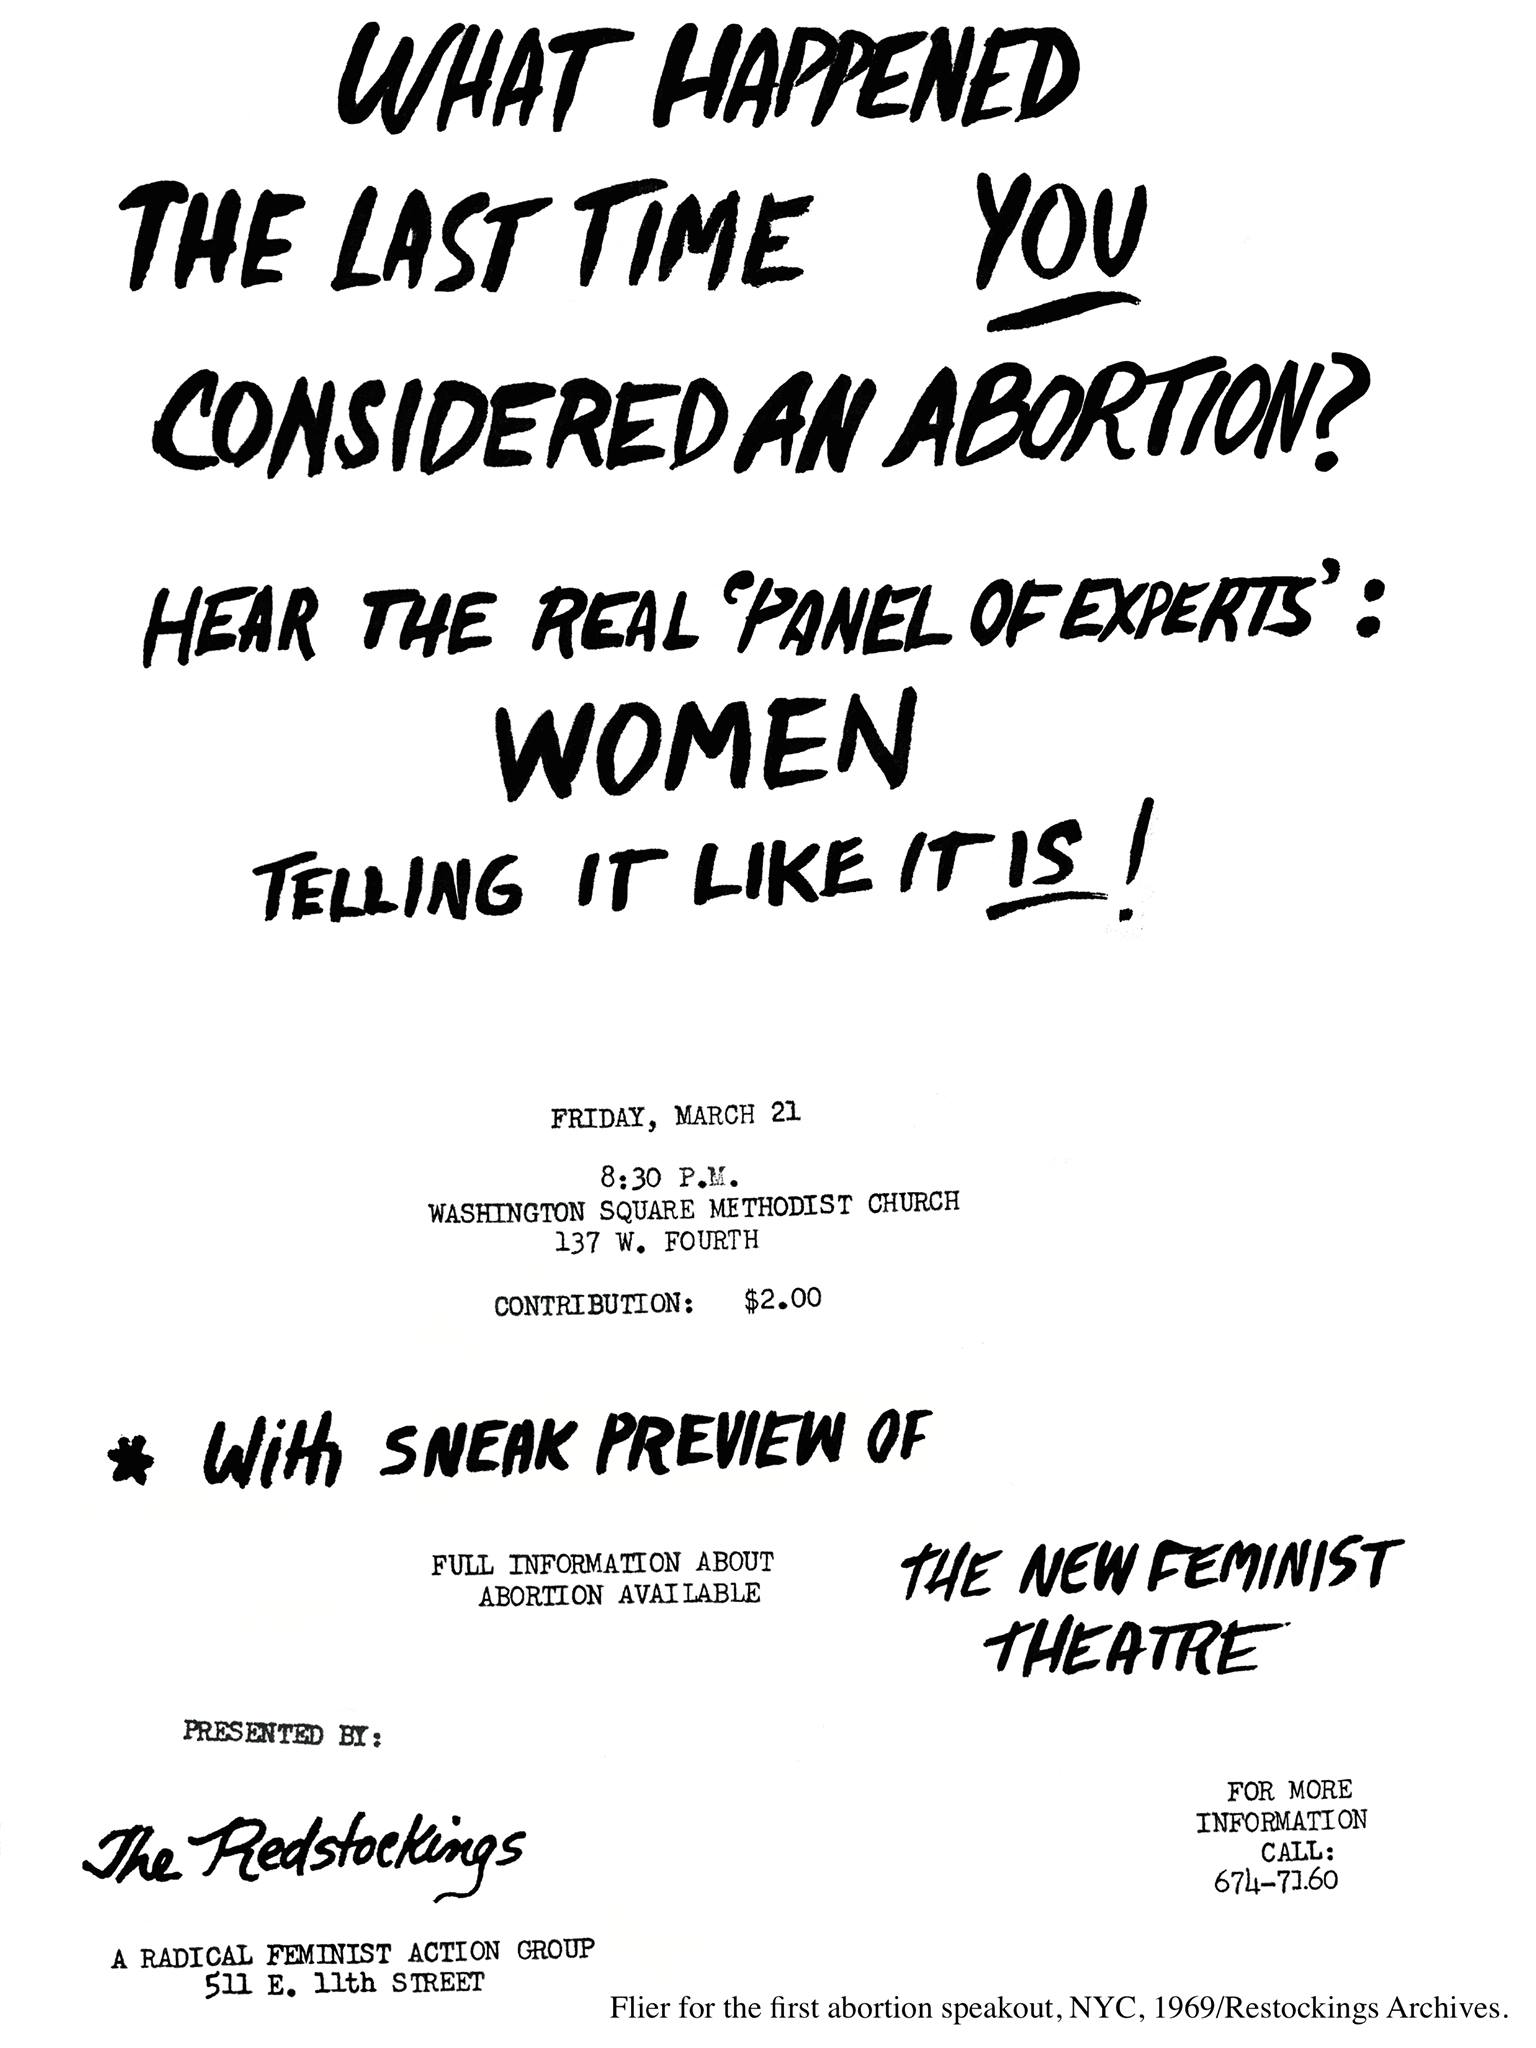 text reads: What happened the last time you had an abortion? Hear the real panel of experts: WOMEN telling it like it is! Friday, March 21st, 8:30pm